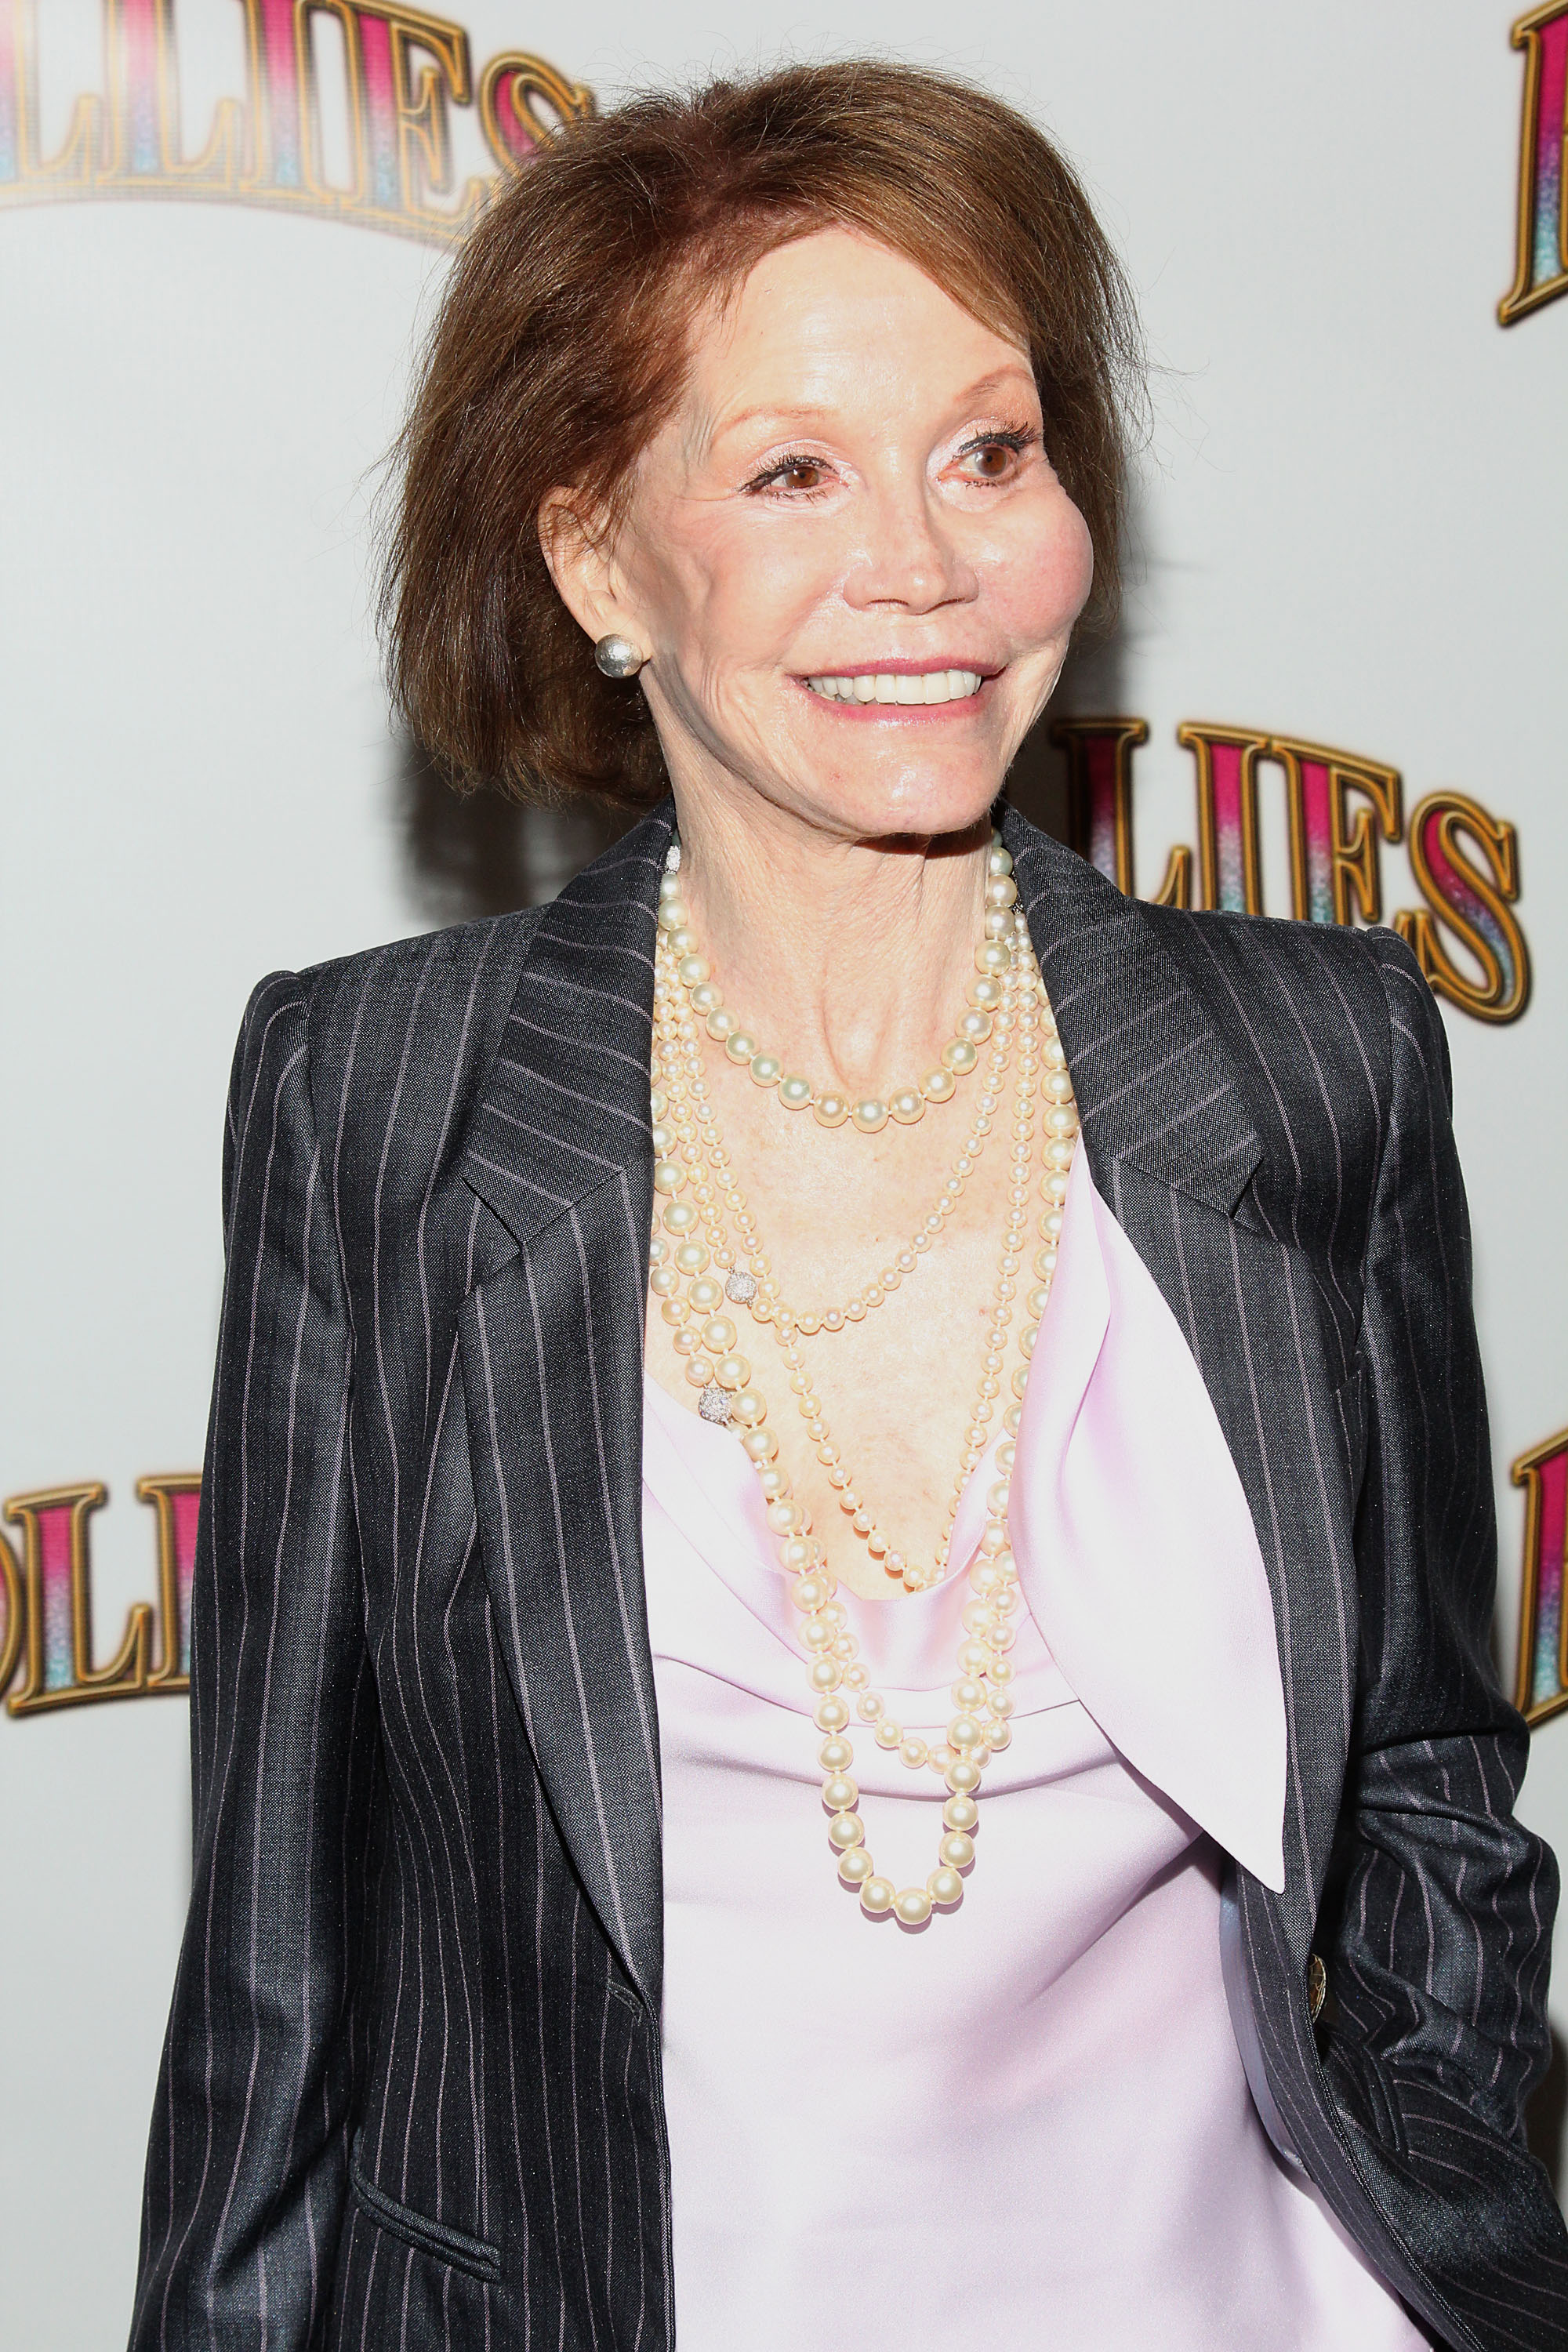 Mary Tyler Moore attends the "Follies" Broadway opening night at the Marquis Theatre on September 12, 2011, in New York City. | Source: Getty Images